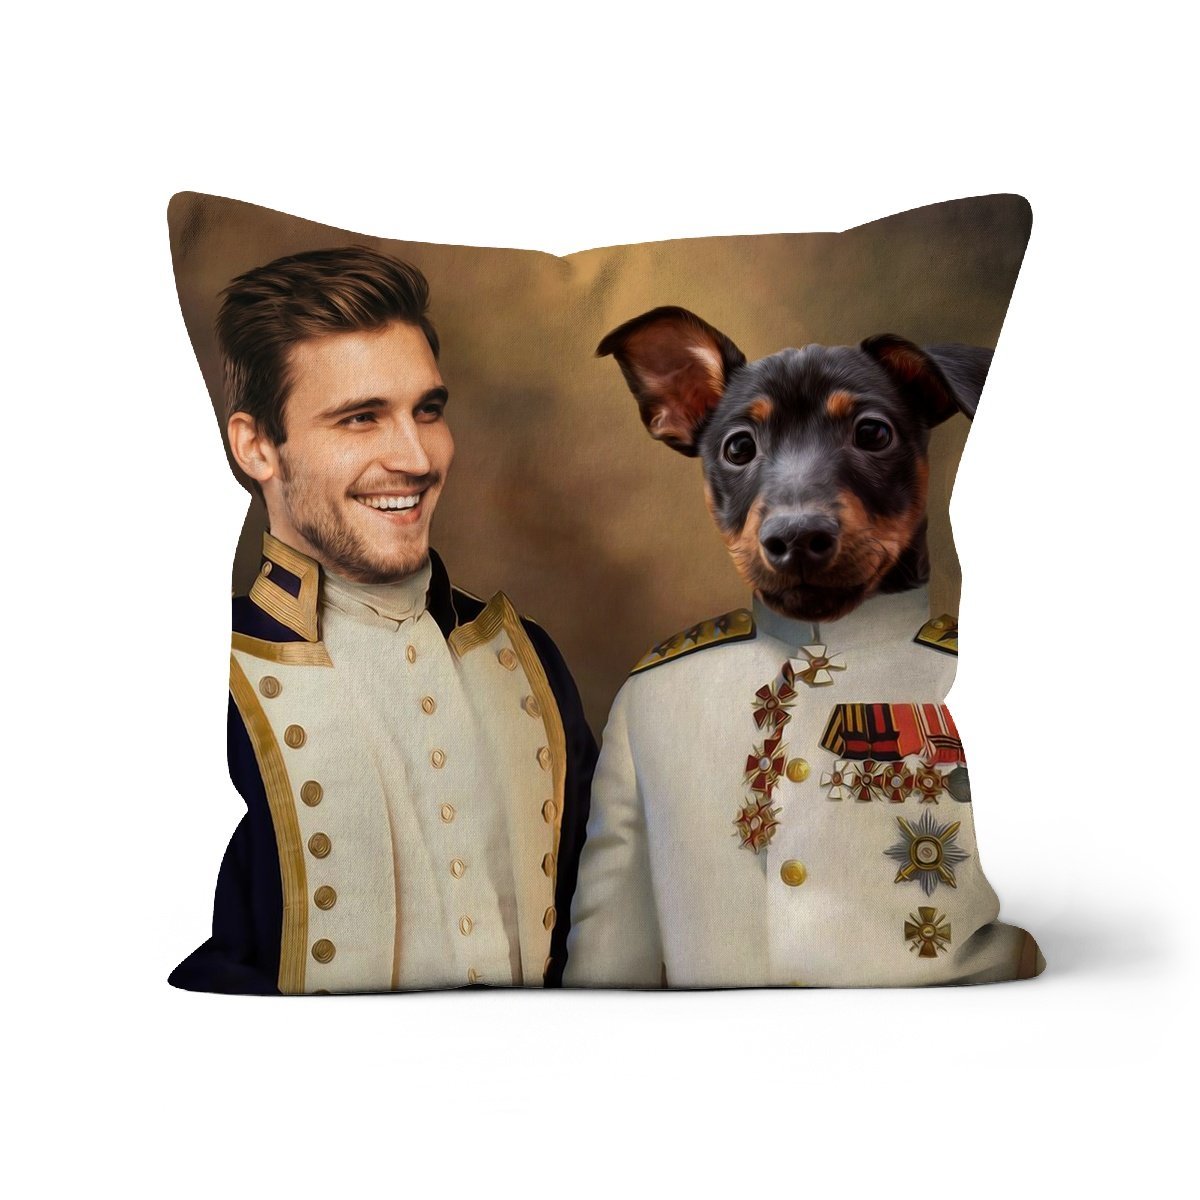 The Admiral & The Sargent: Pet & Owner Cushion - Paw & Glory - #pet portraits# - #dog portraits# - #pet portraits uk#paw & glory, custom pet portrait pillow,dog pillows personalized, pet face pillows, dog photo on pillow, custom cat pillows, pillow with pet picture